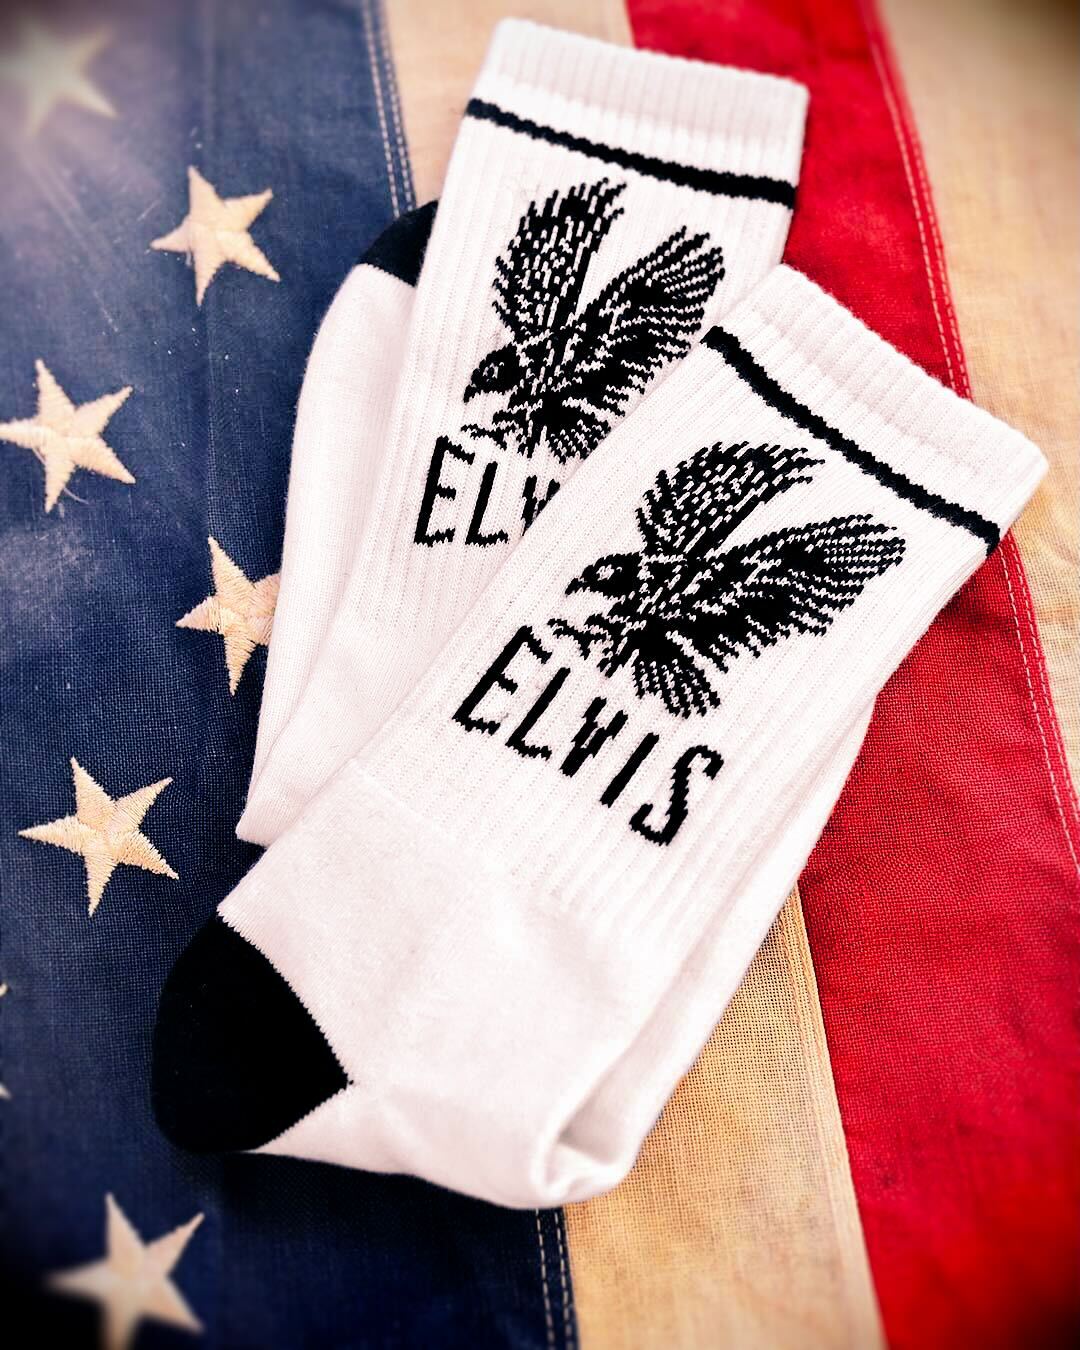 Elvis Presley Eagle Socks - Roots of Fight Canada